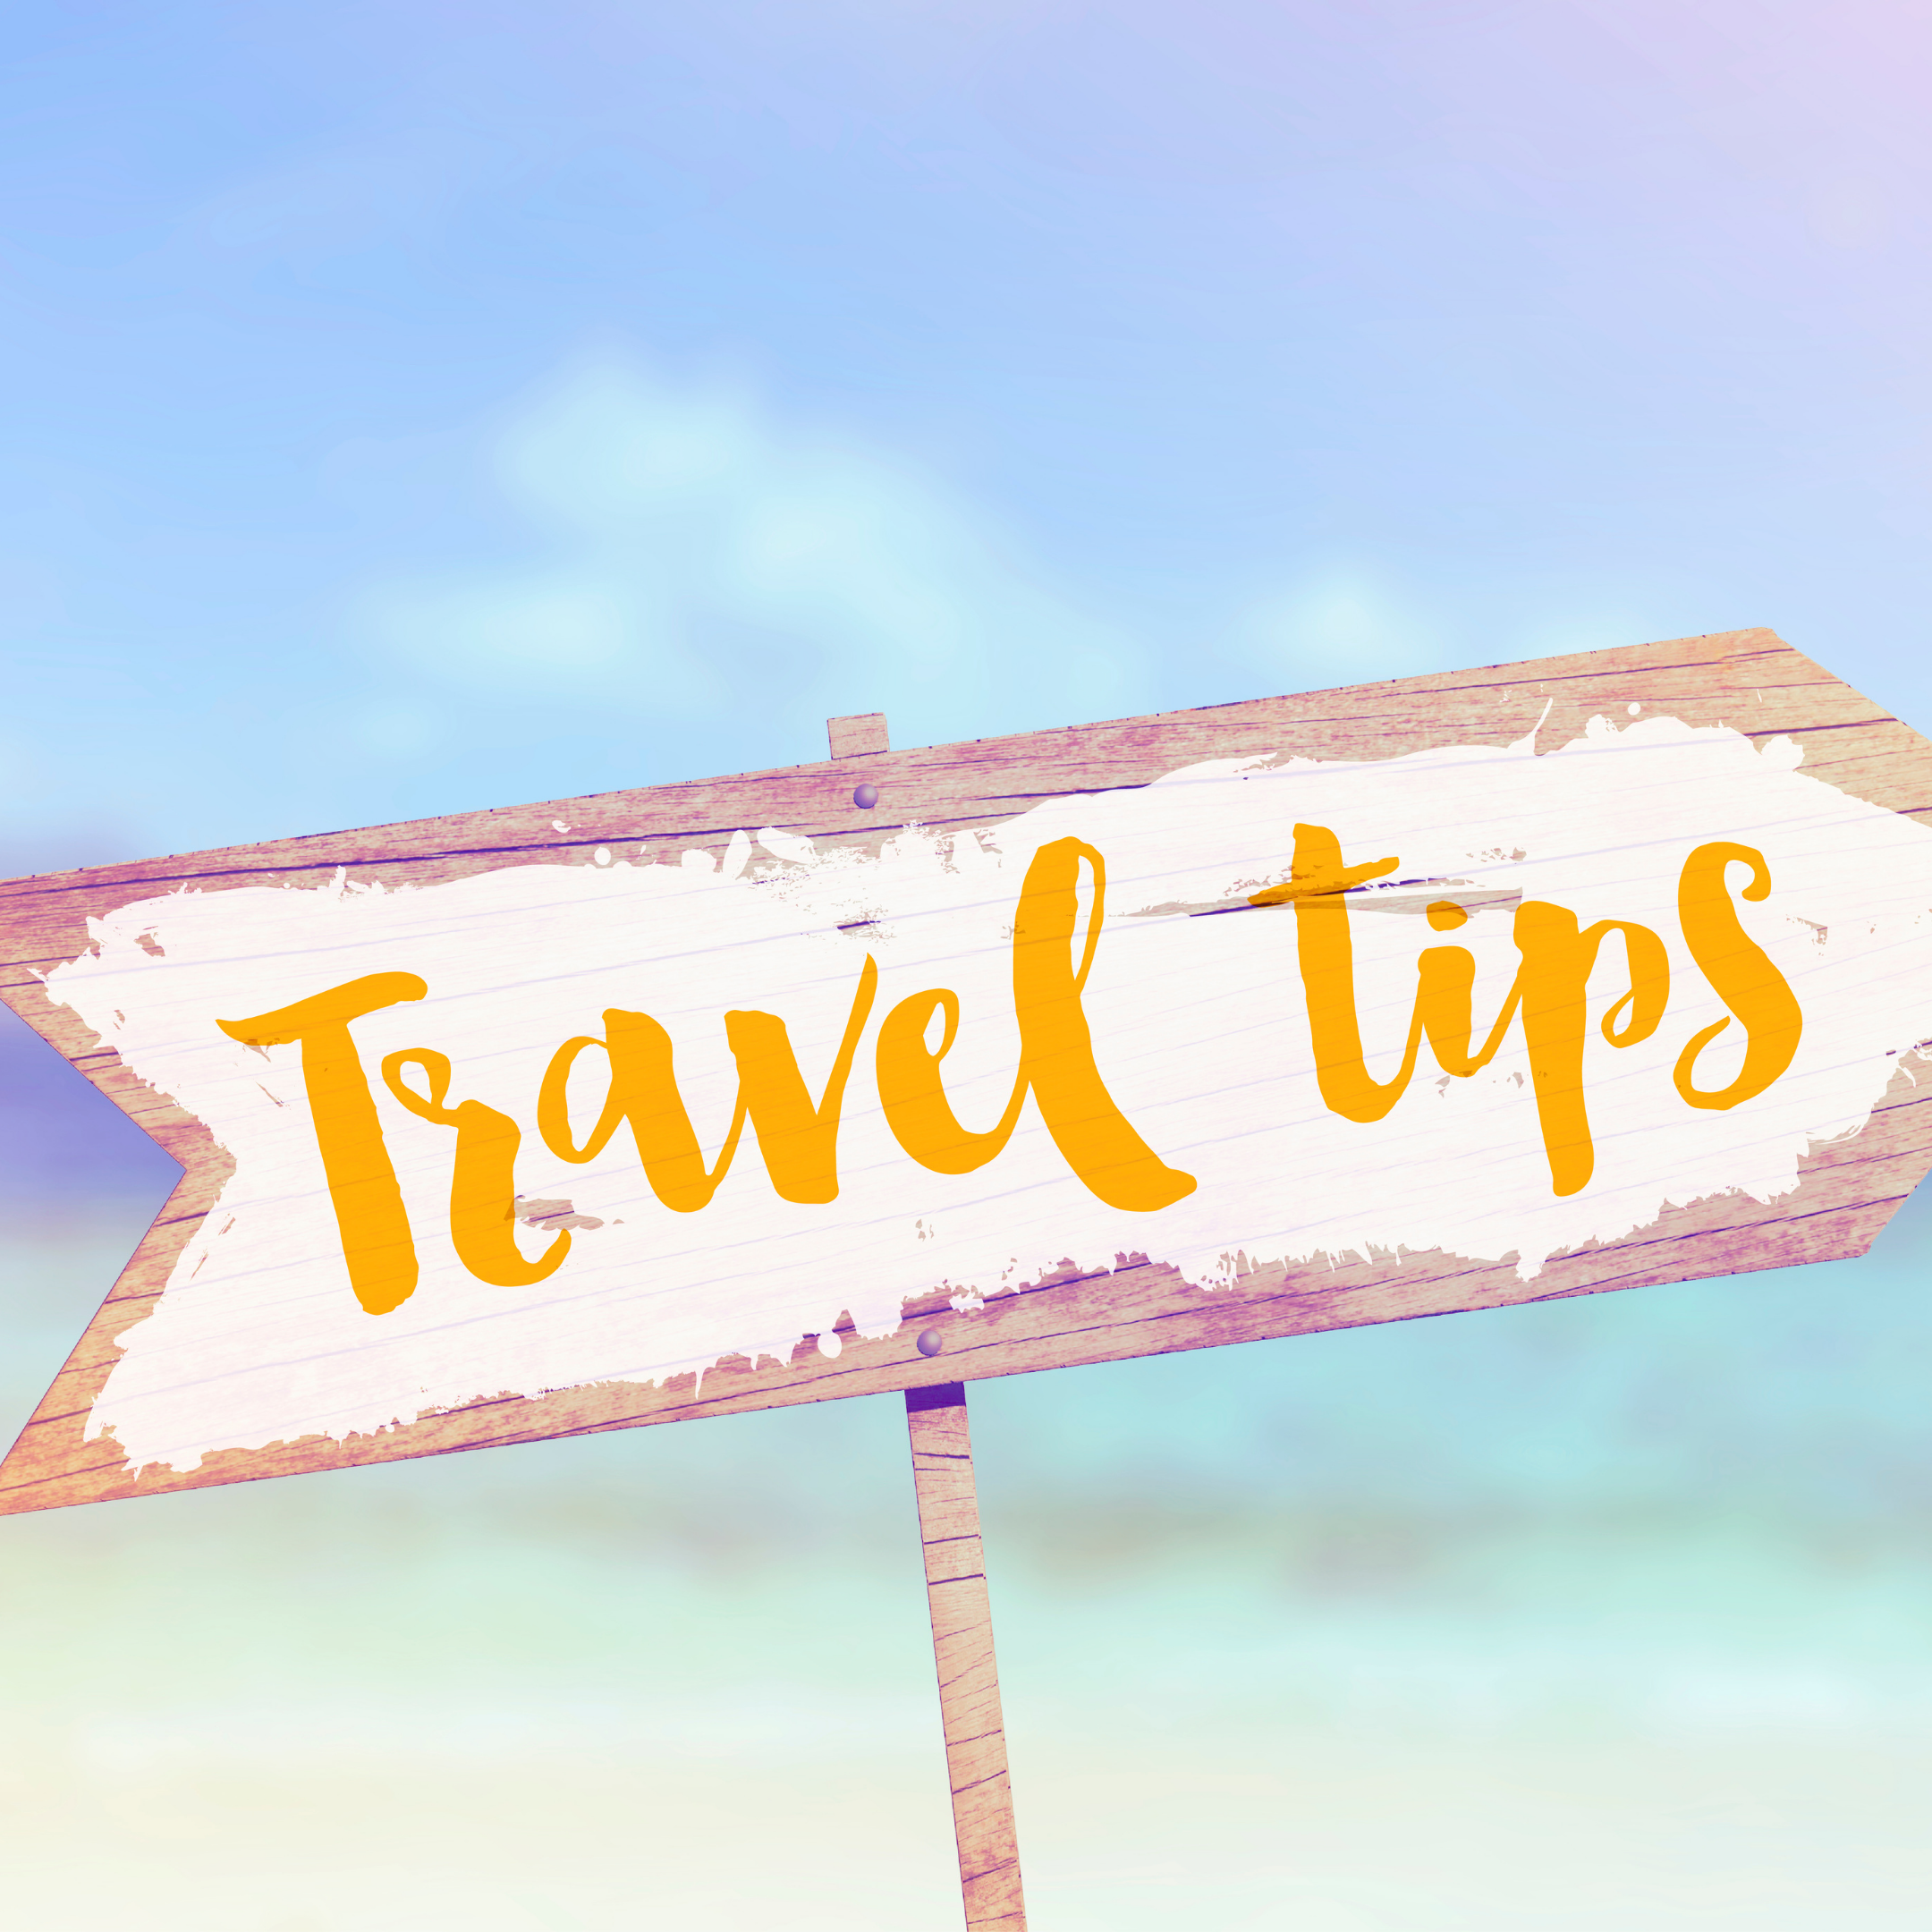 Wooden sign in front of beach scene with travel tips written on the sign